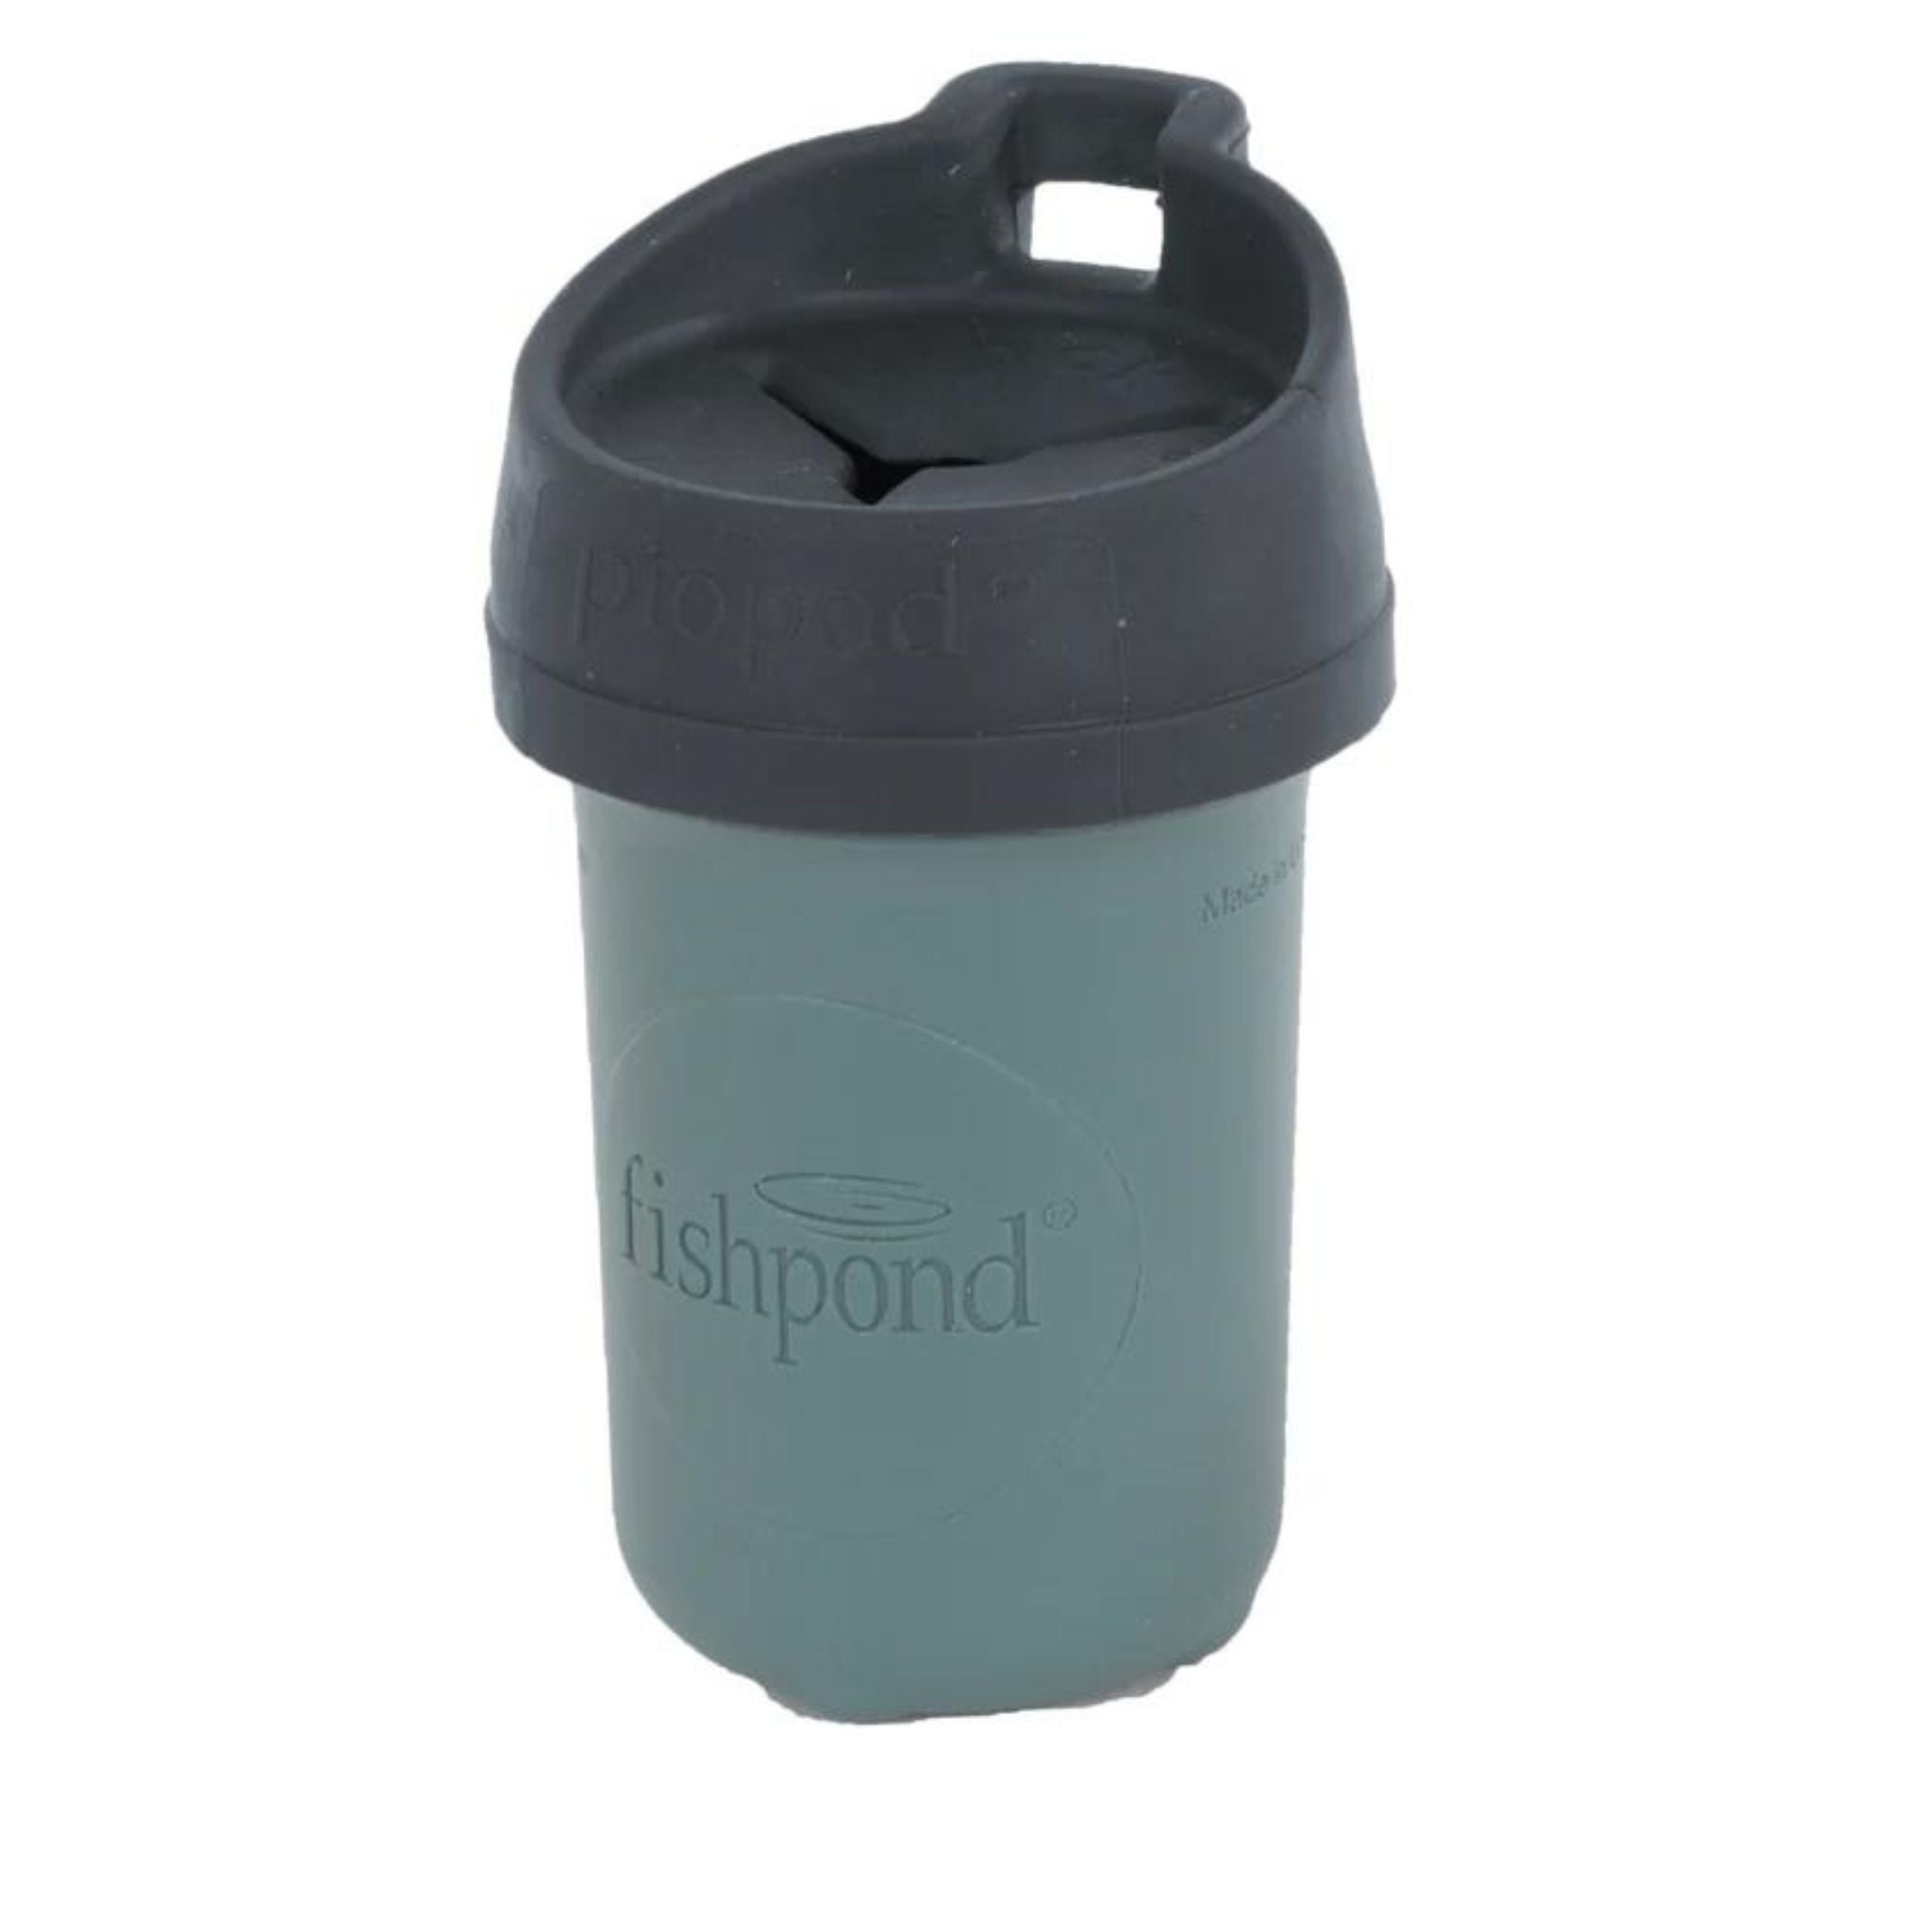 Fishpond PIOPOD (Pack It Out) Microtrash Container